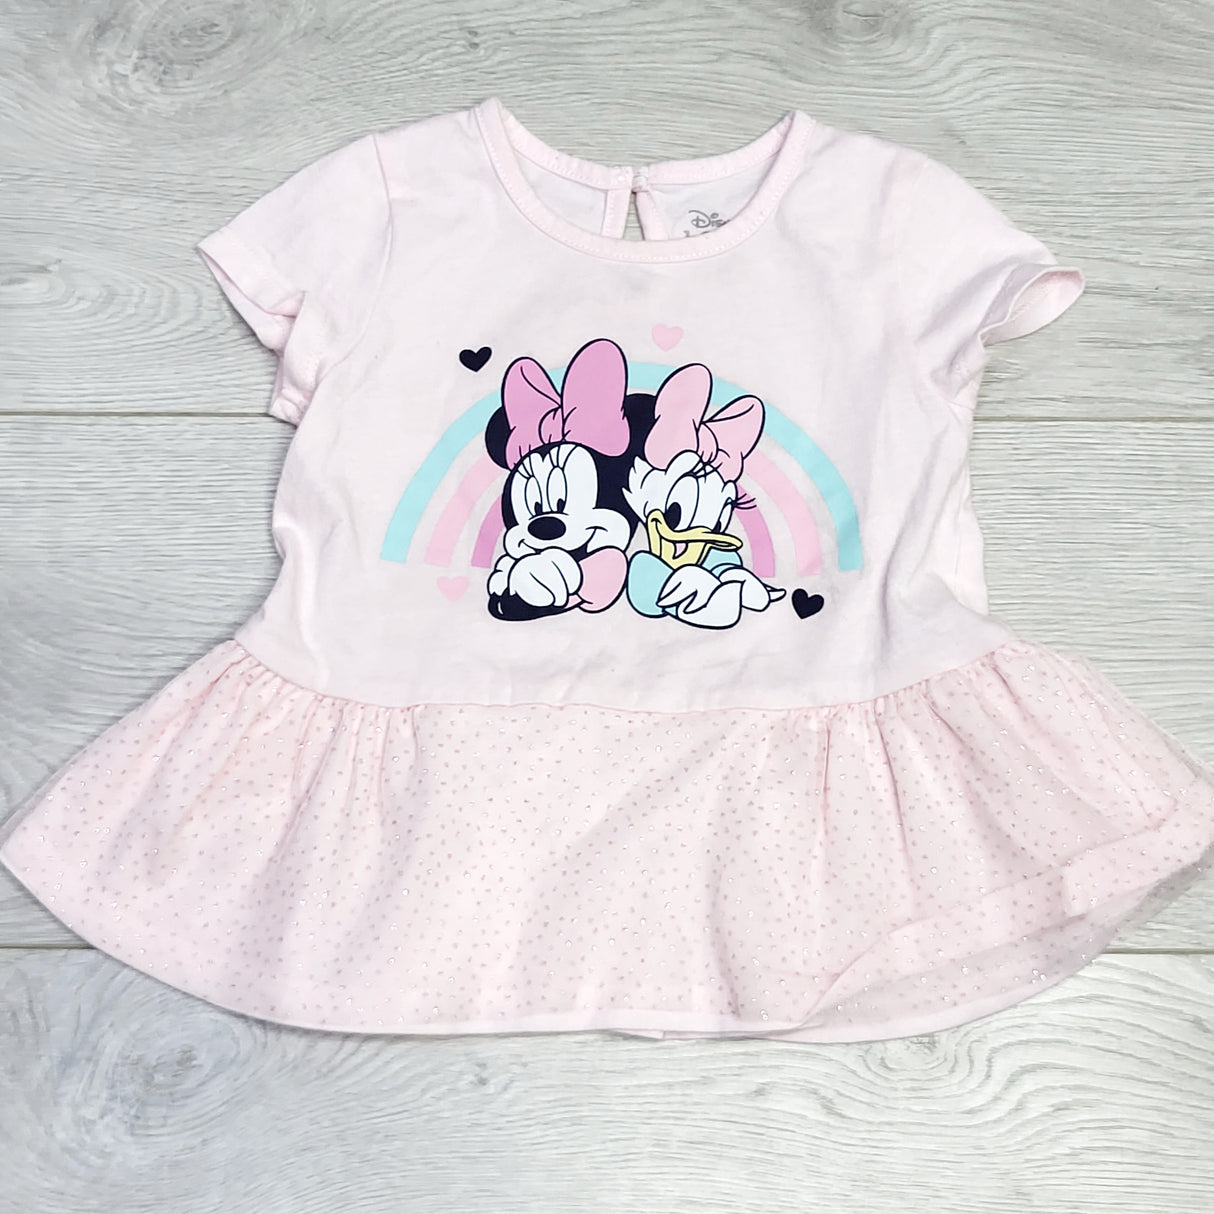 MSNDS1 - Disney Baby pink top with tulle trim. Size 12-18 months